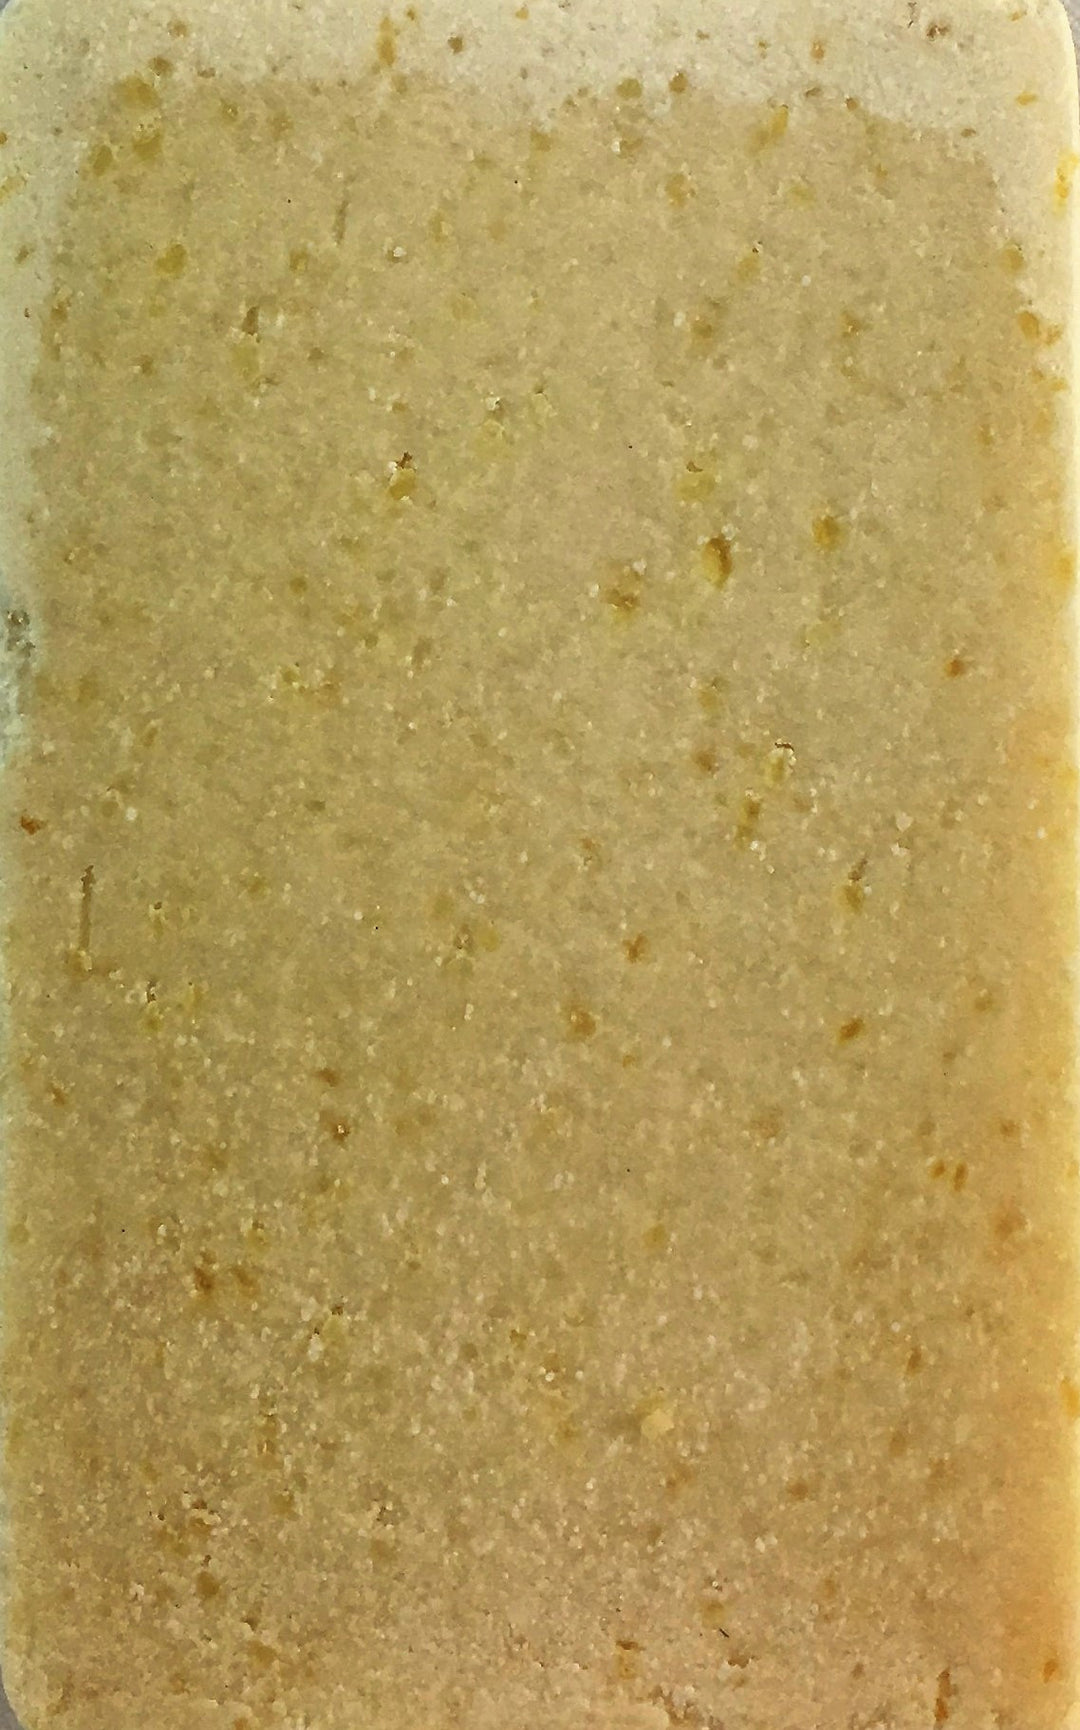 Castile Soap Bar (Olive and Oatmeal) from Handmade Naturals-not included in the 5 Soap Deal